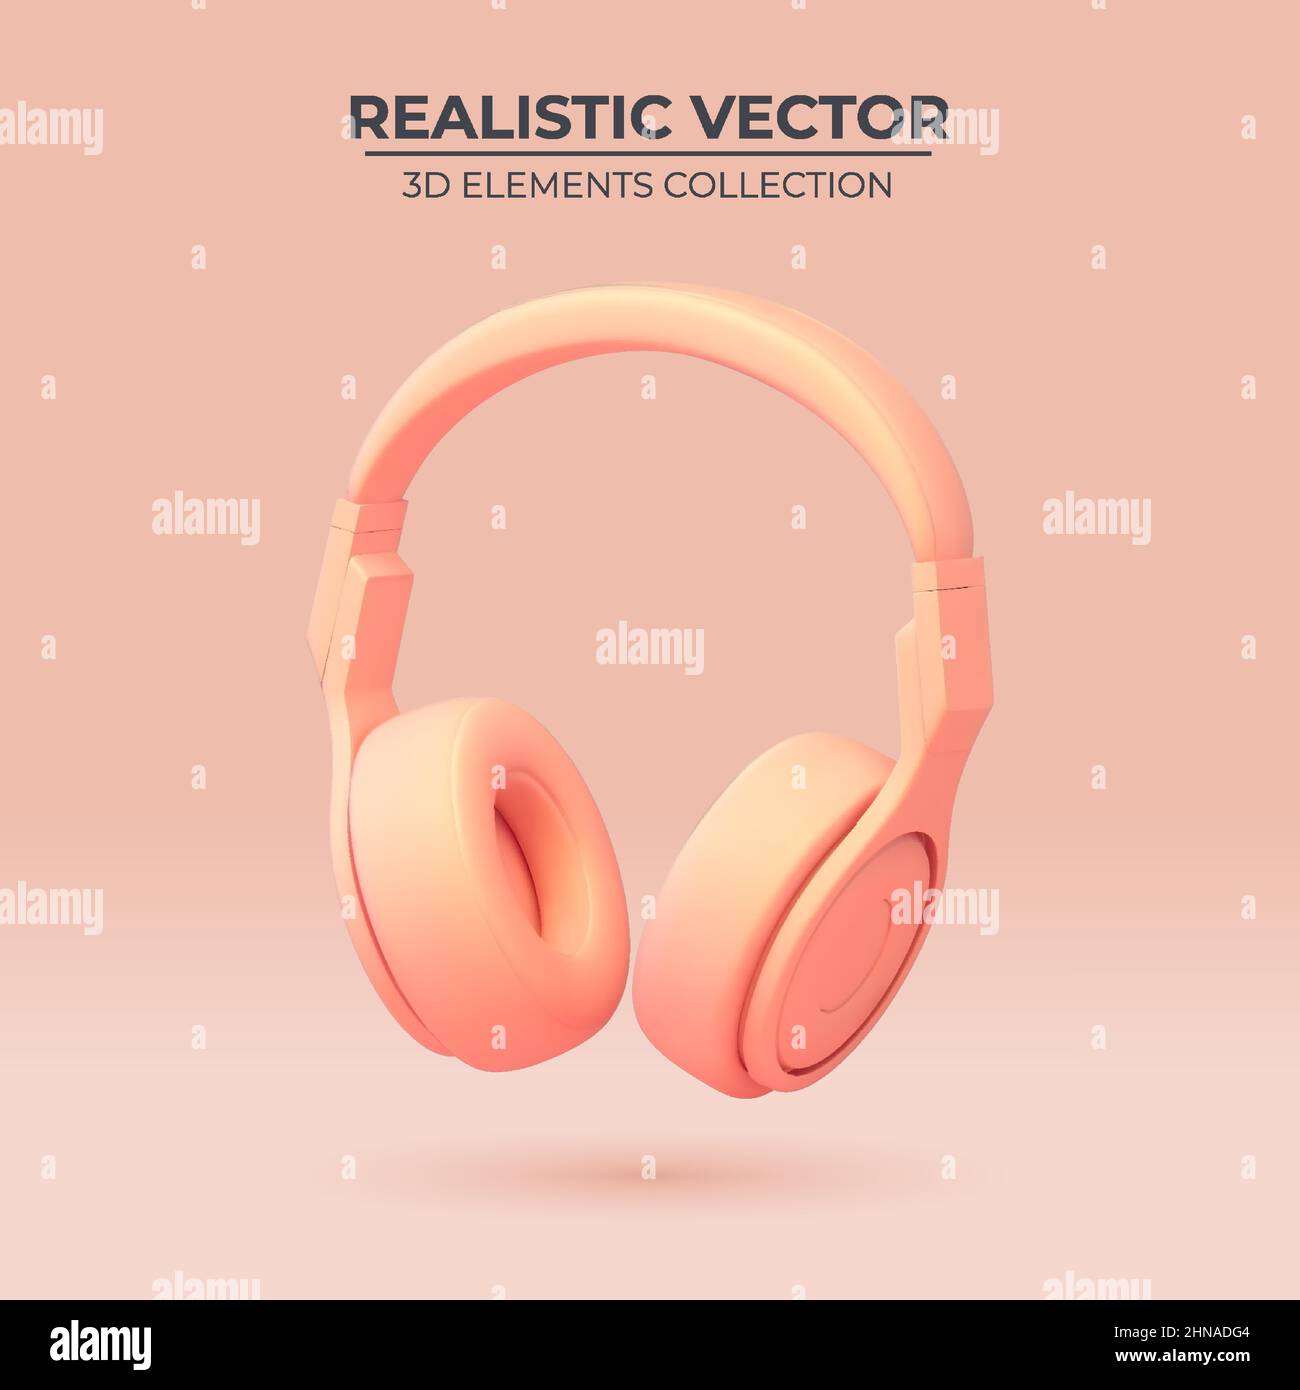 Realistic headphones in trendy color. 3d vector headphone element. Realistic object for music or game concept, poster design, flyer, website. Stock Vector